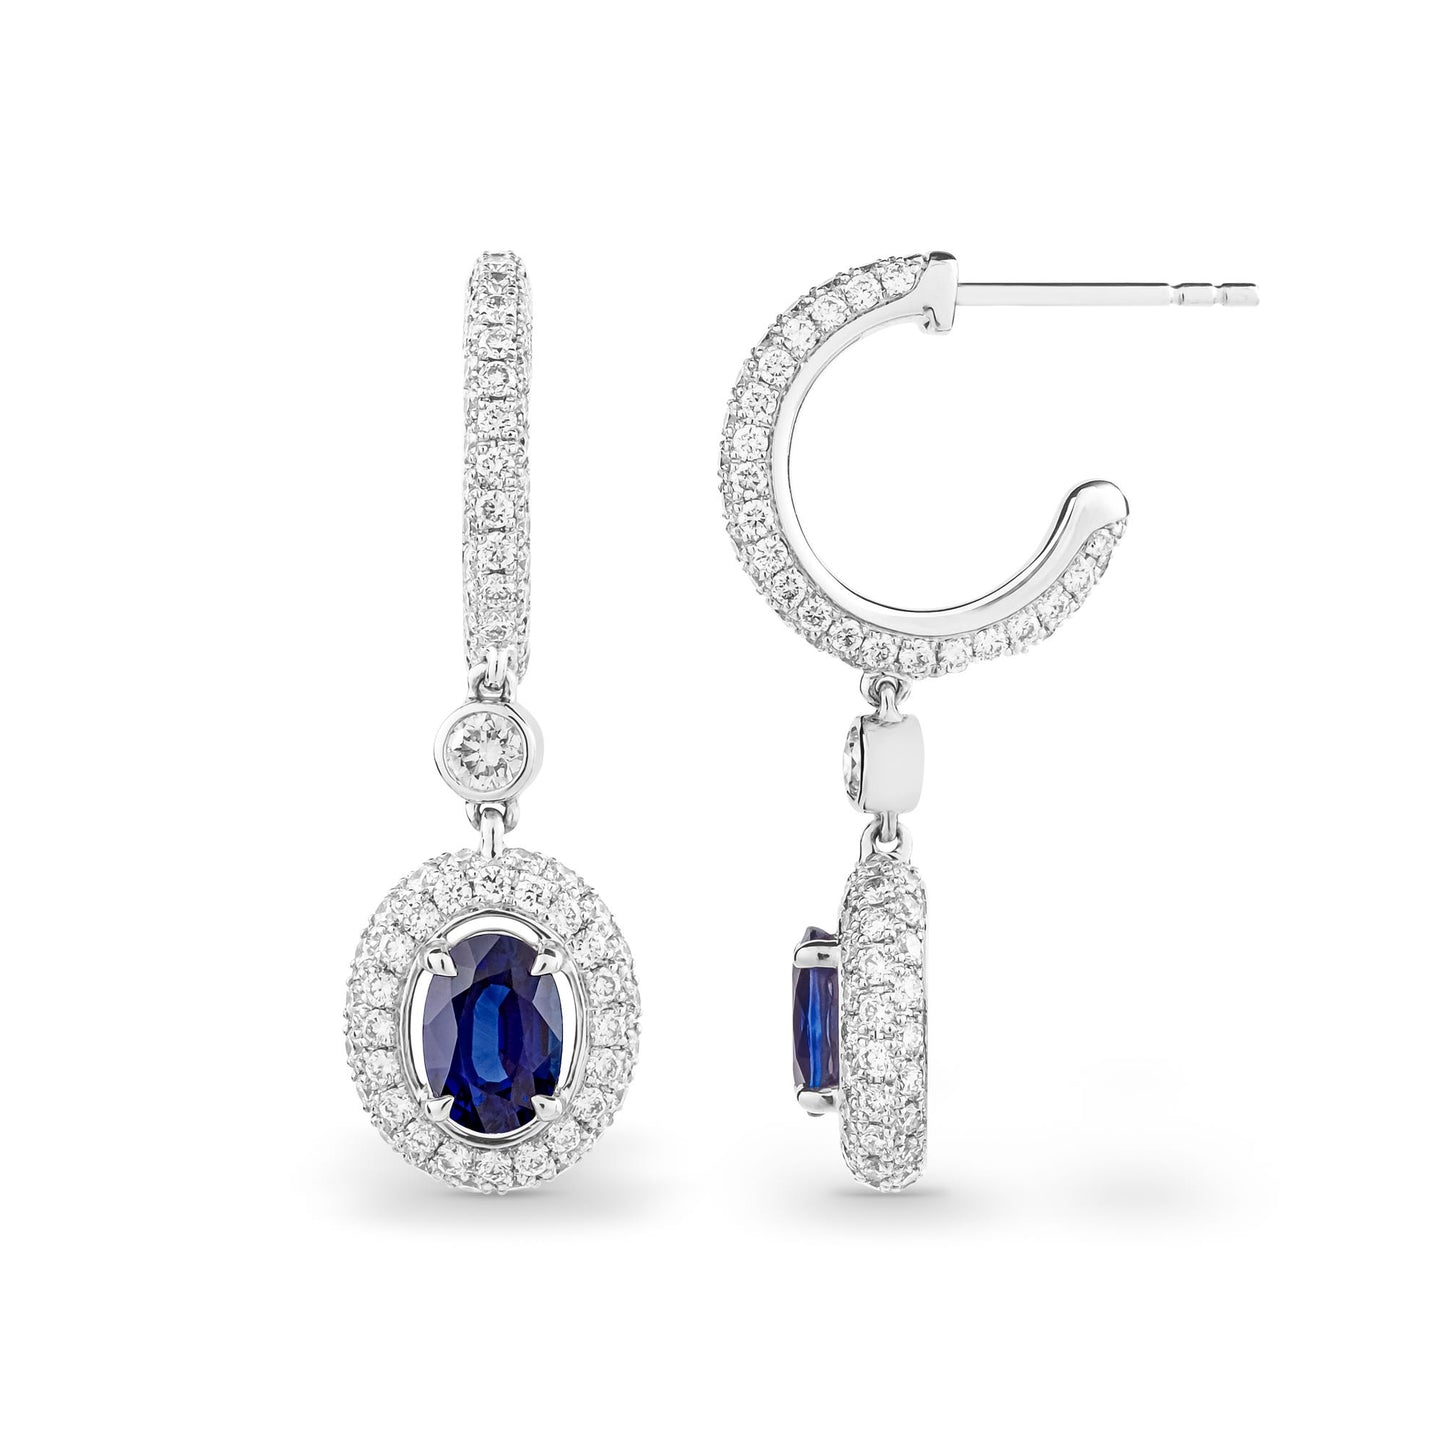 Platinum Hoop Earrings with Oval Sapphire and Diamonds